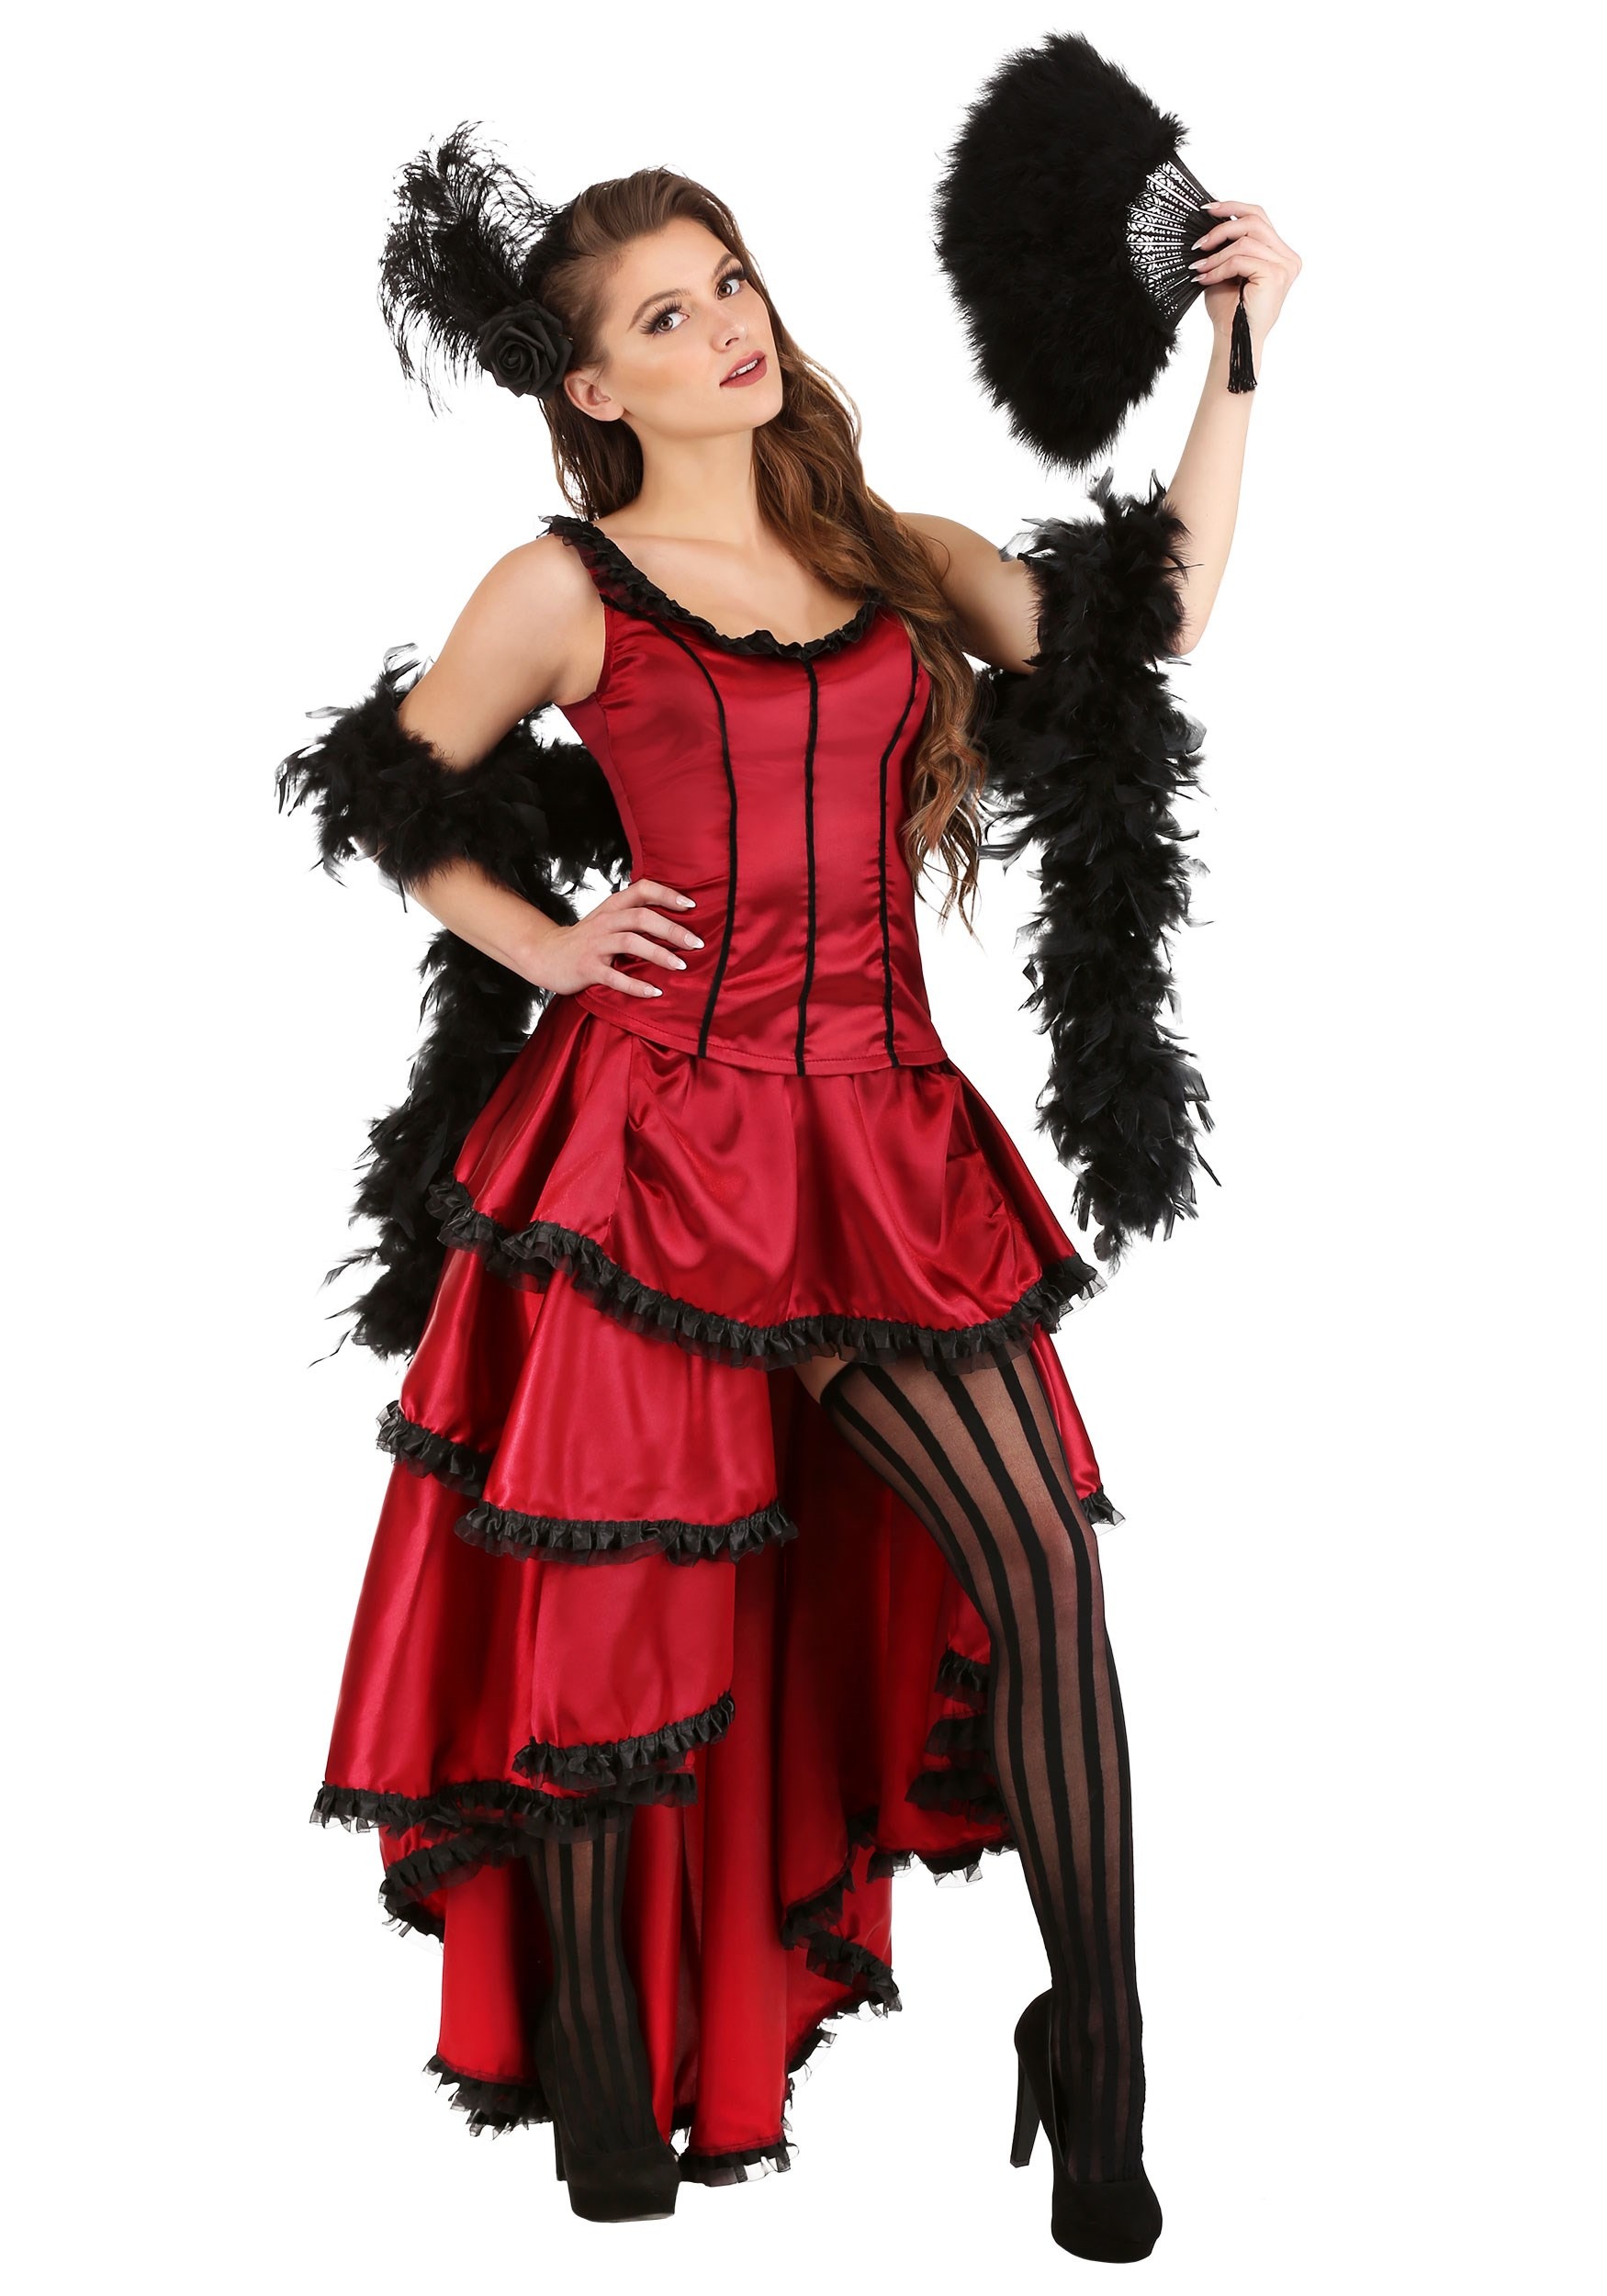 https://images.halloweencostumes.ca/products/46114/1-1/womens-sultry-saloon-girl-costume.jpg